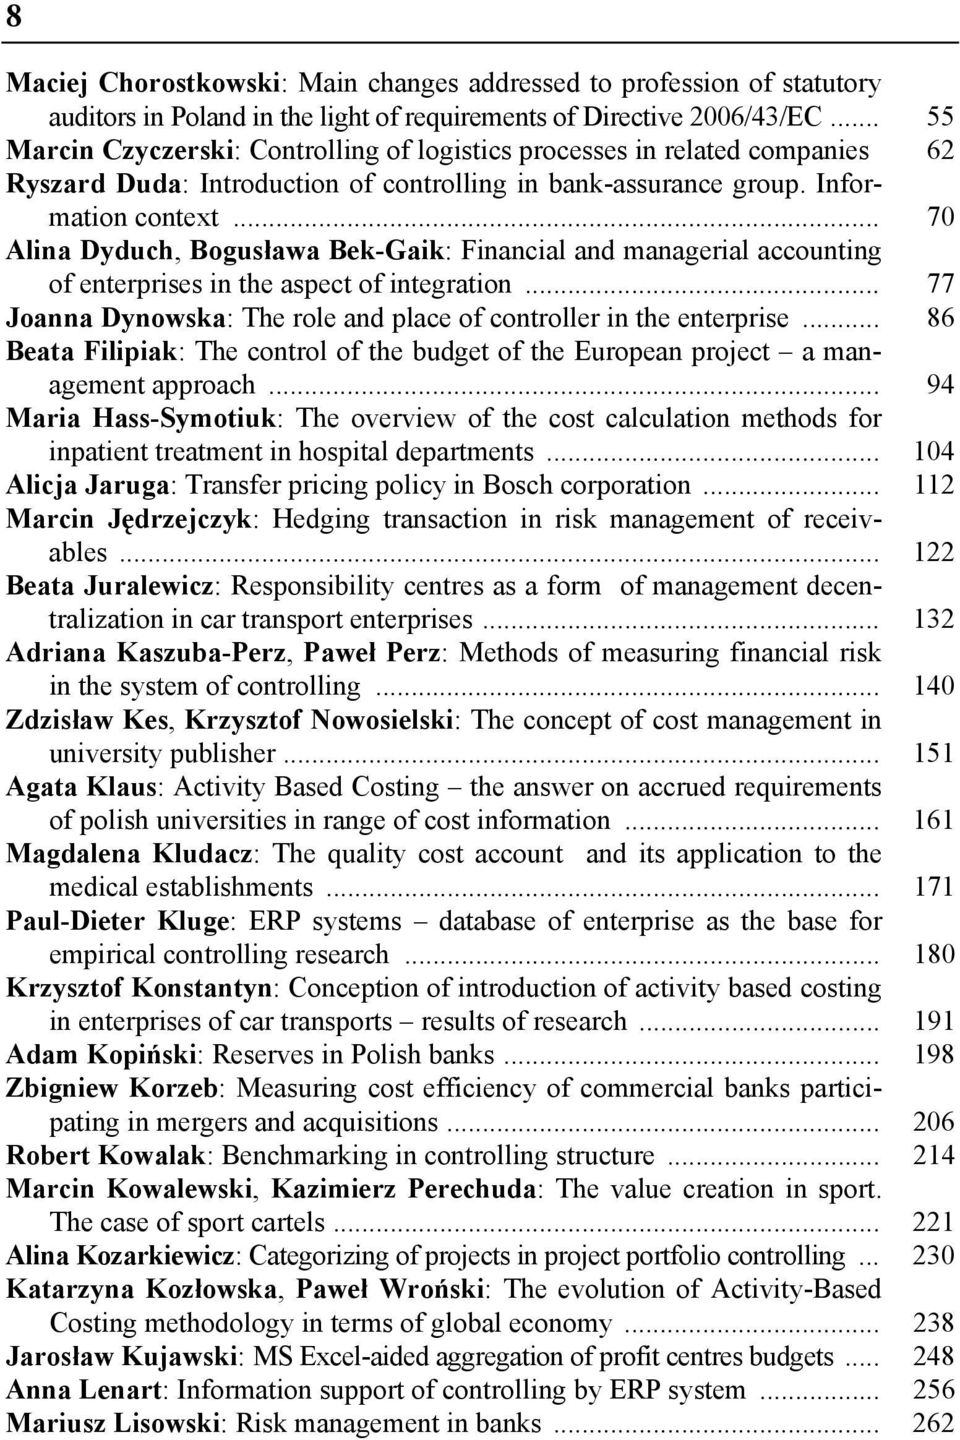 .. 70 Alina Dyduch, Bogusława Bek-Gaik: Financial and managerial accounting of enterprises in the aspect of integration... 77 Joanna Dynowska: The role and place of controller in the enterprise.